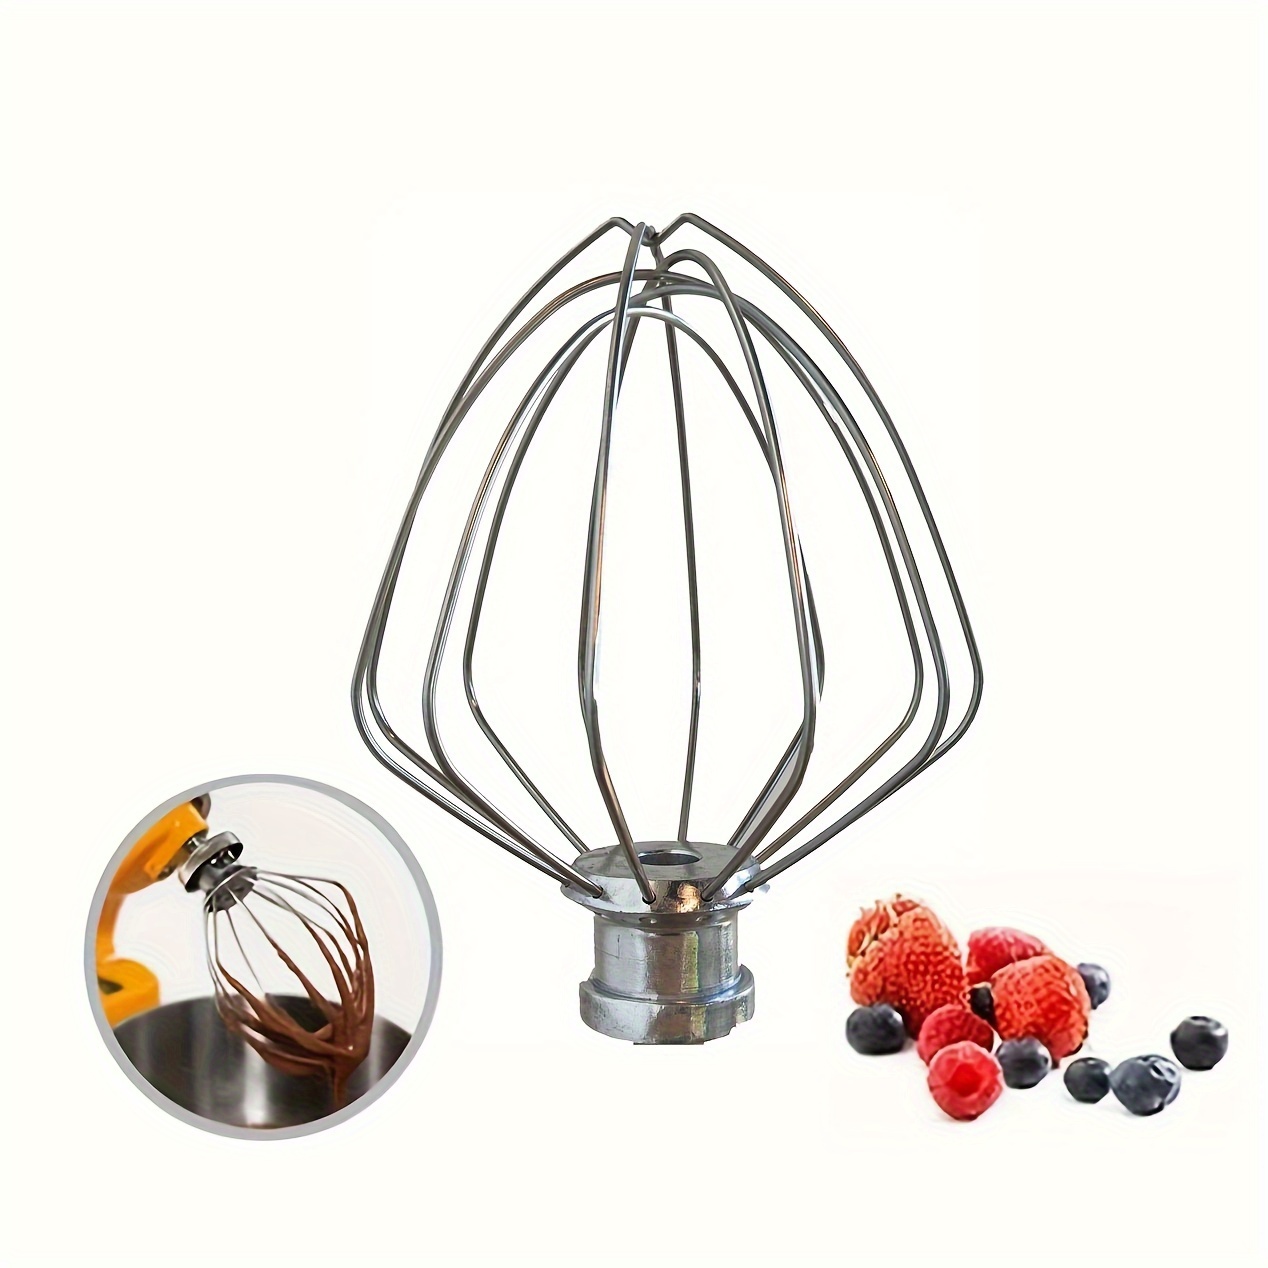 Stainless Steel Wire Whip for KitchenAid® 4.5 and 5 Quart Tilt-Head Stand  Mixers